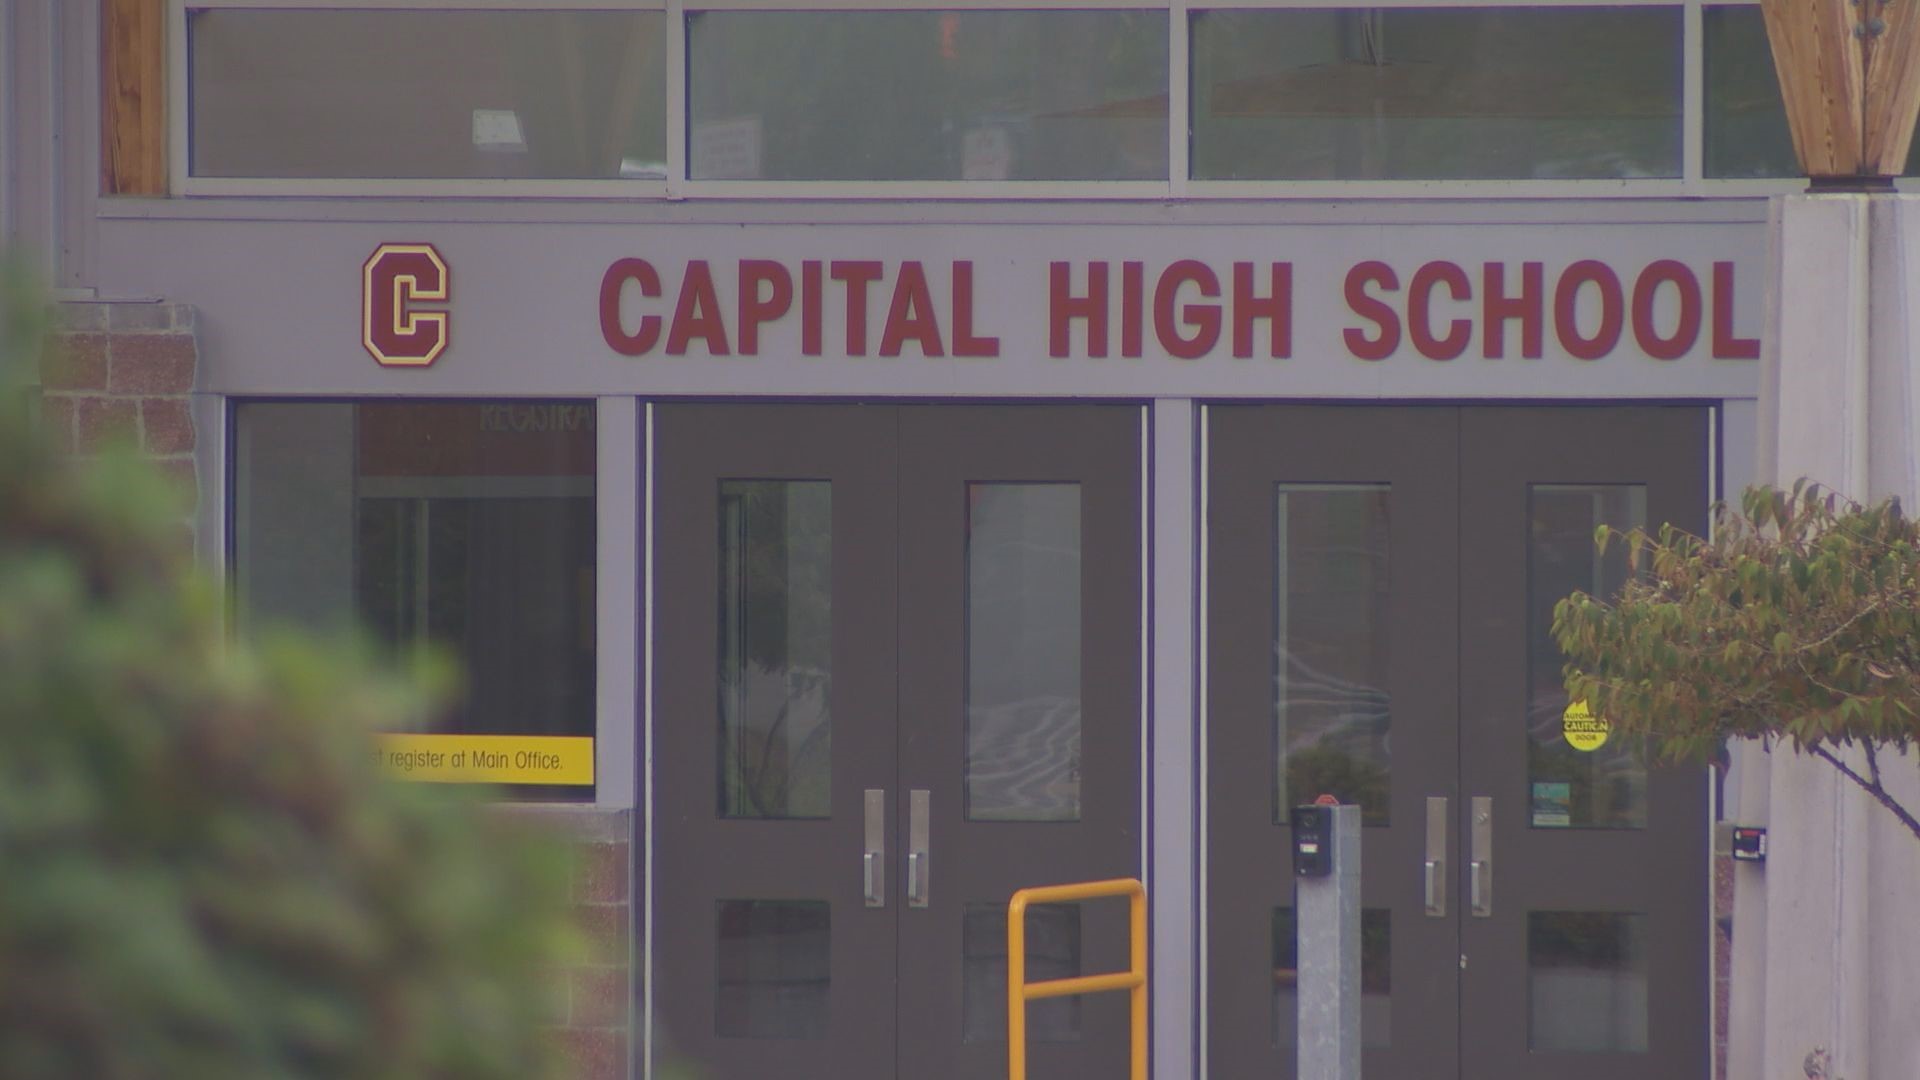 A 15-year-old student appeared in court on Sept. 7 after bringing a loaded gun to high school on the first day of classes.